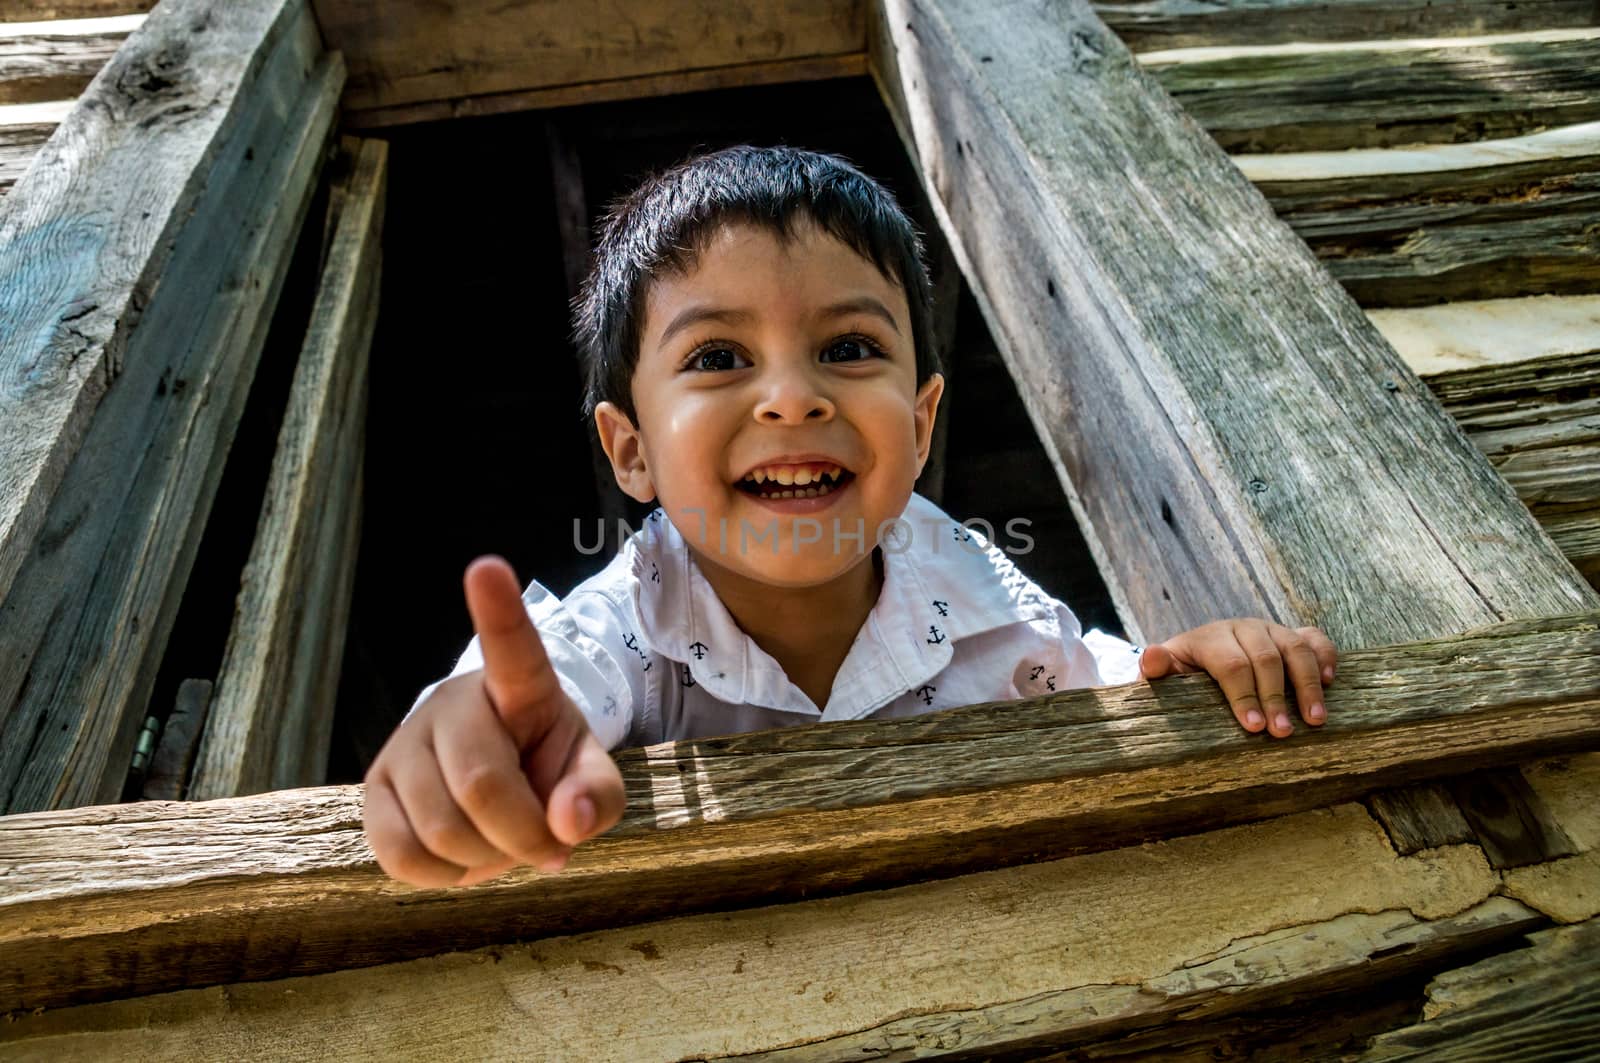 Latino child looking out the window of a wooden house or shed, pointing at the camera and smiling